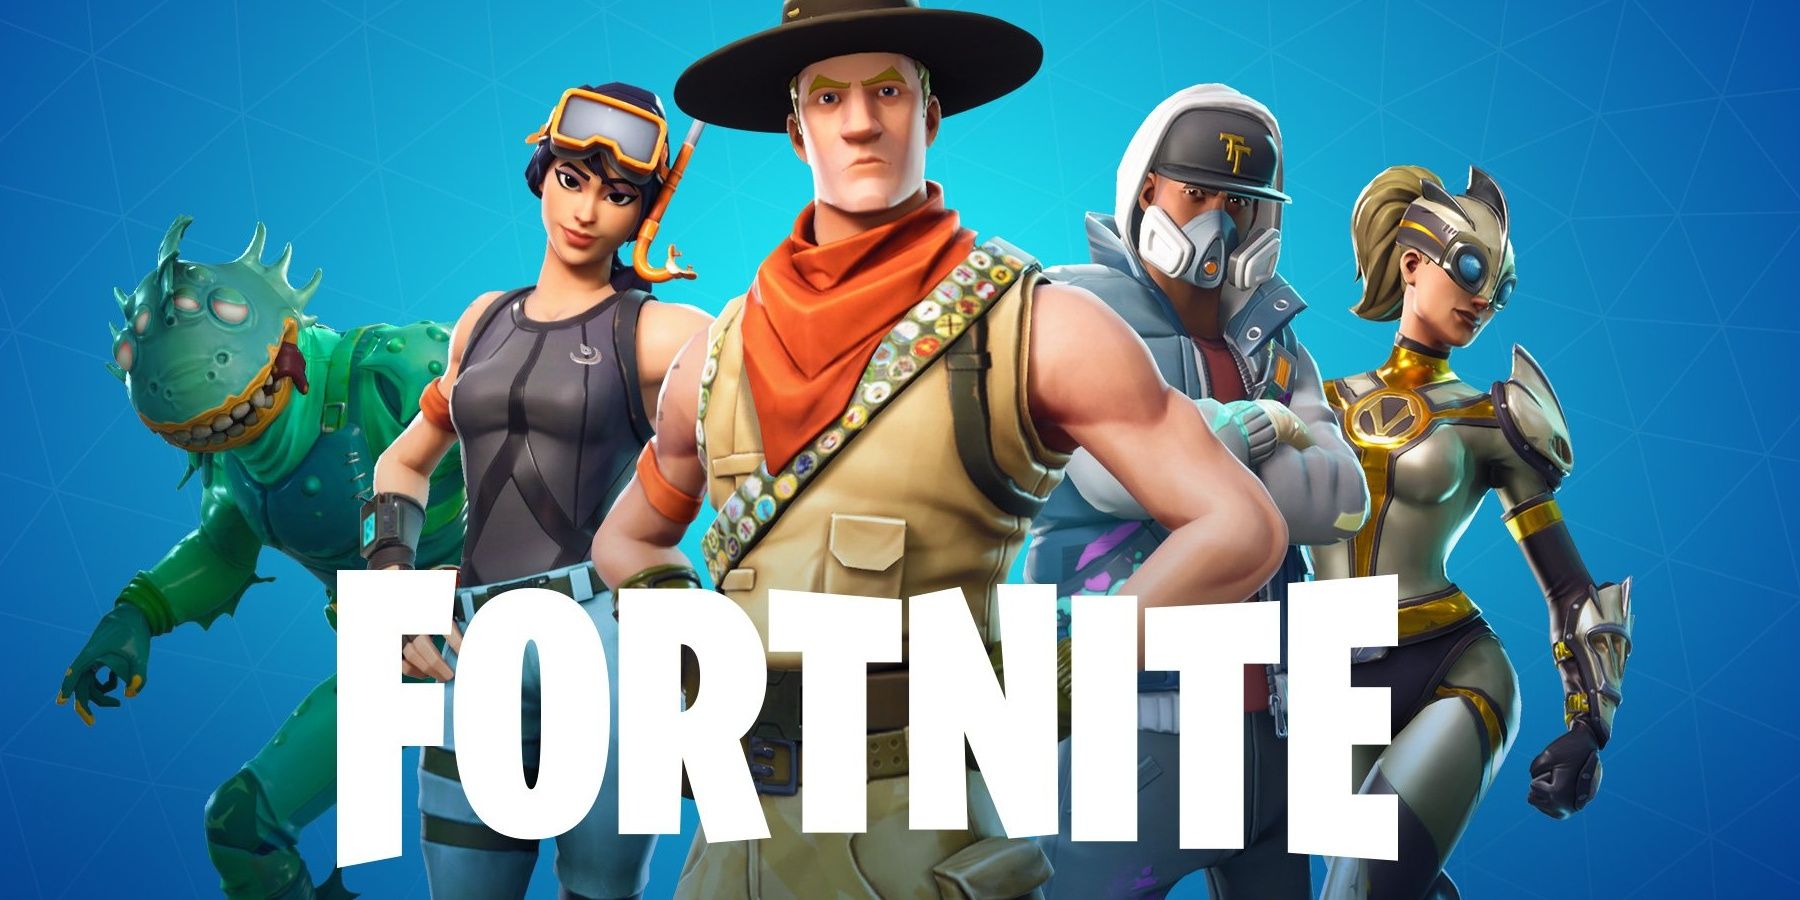 Fortnite characters standing next to each other with the games logo Cropped